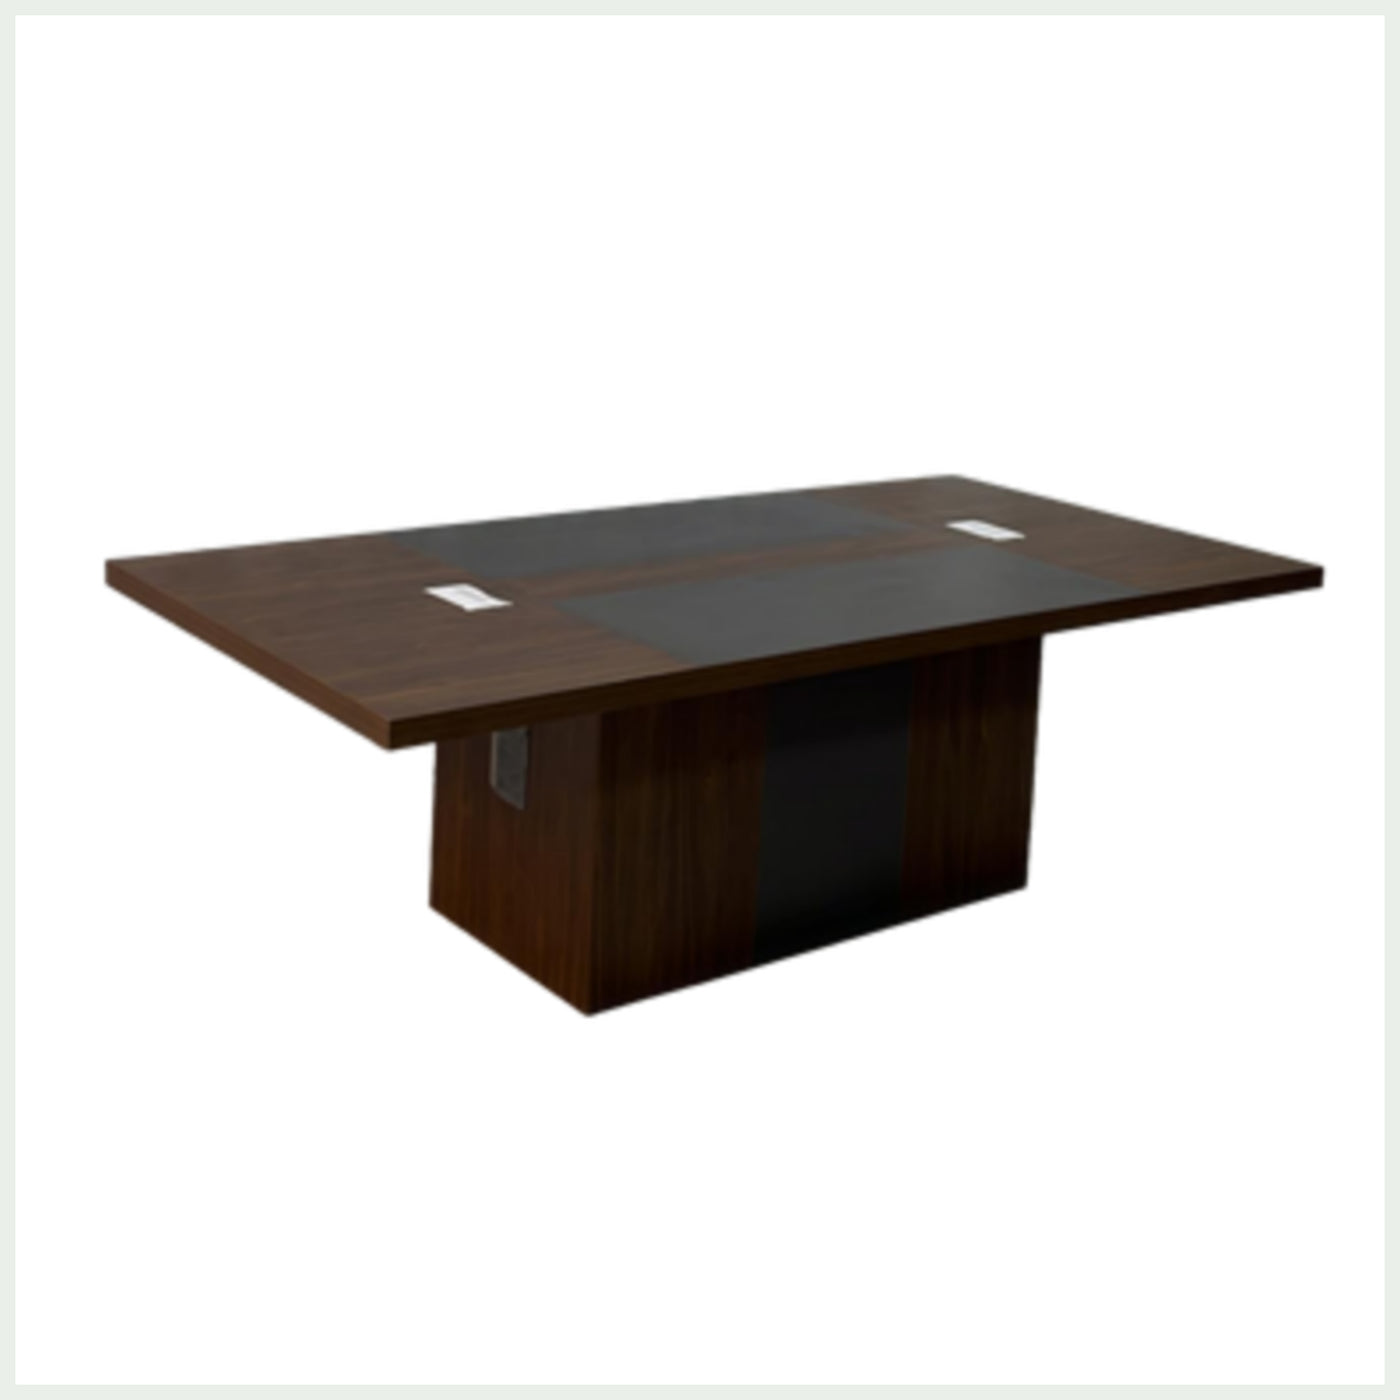 Wooden Meeting Table